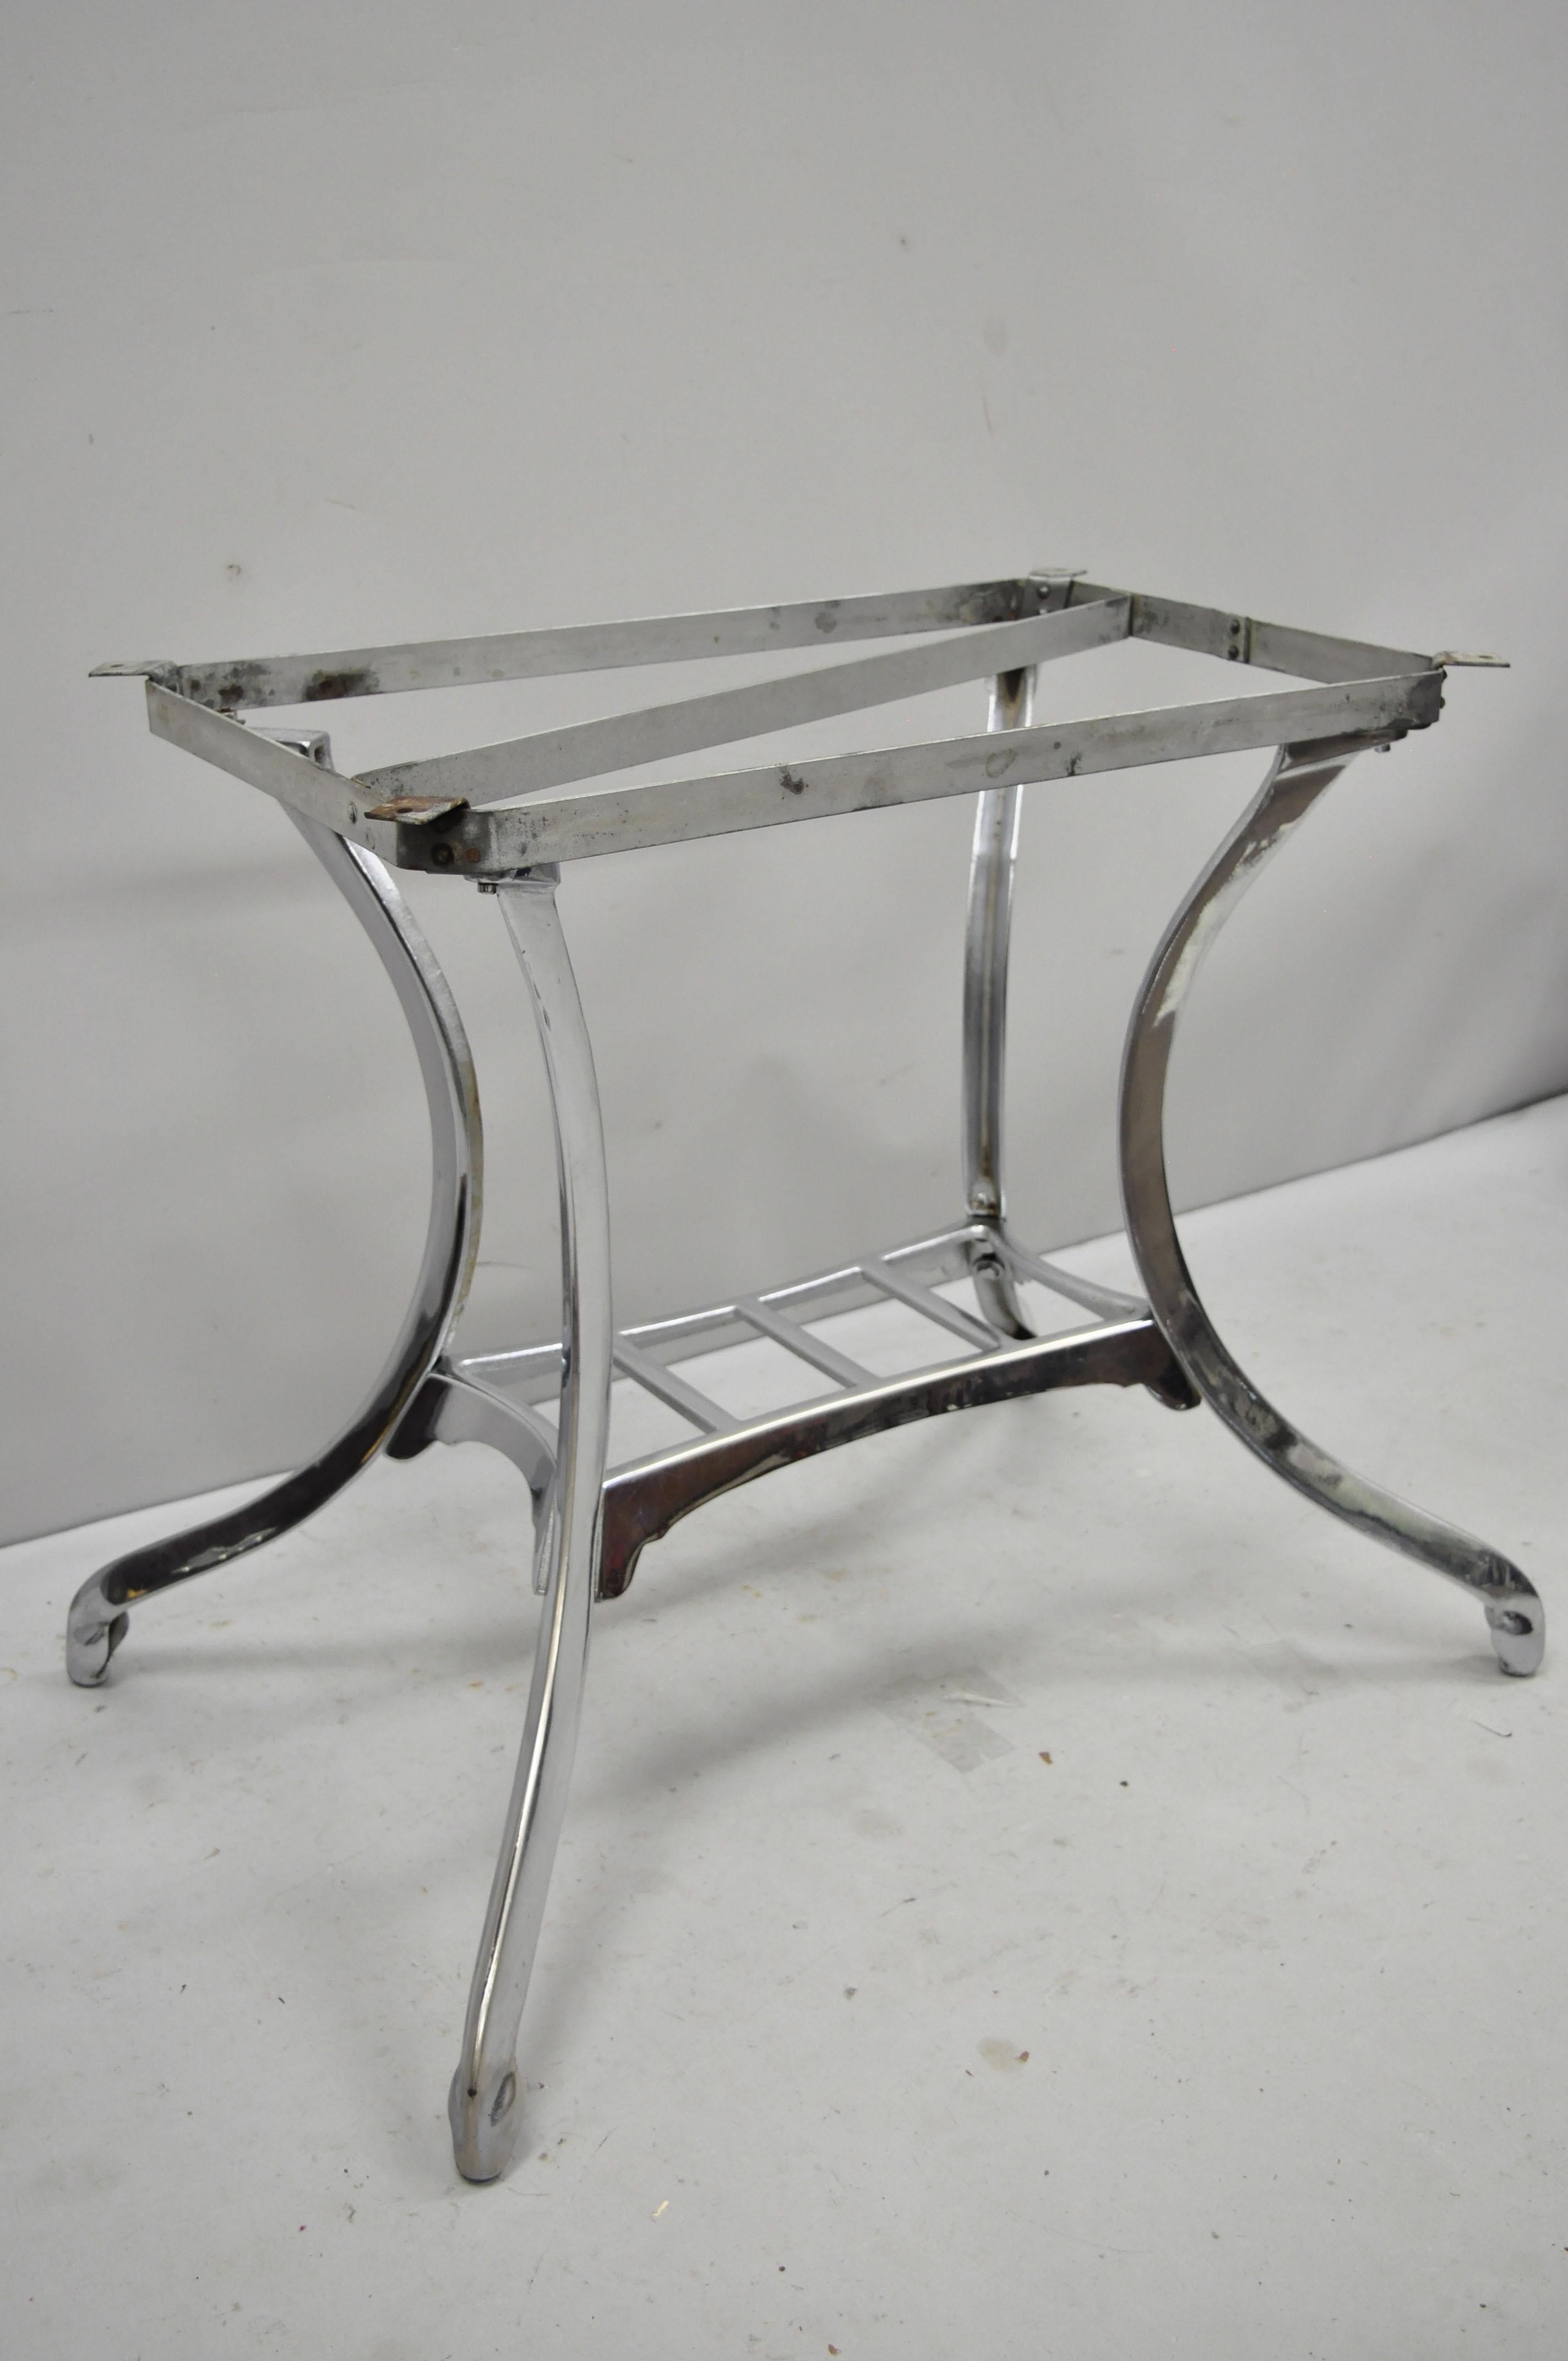 Vintage Art Deco Polished Steel Sculptural Dining Table Base by Chicago Foundry HDW Co. Item features polished steel metal frame, stretcher base, quality American craftsmanship, sleek sculptural form. Approximately 40 lbs. Stamped 